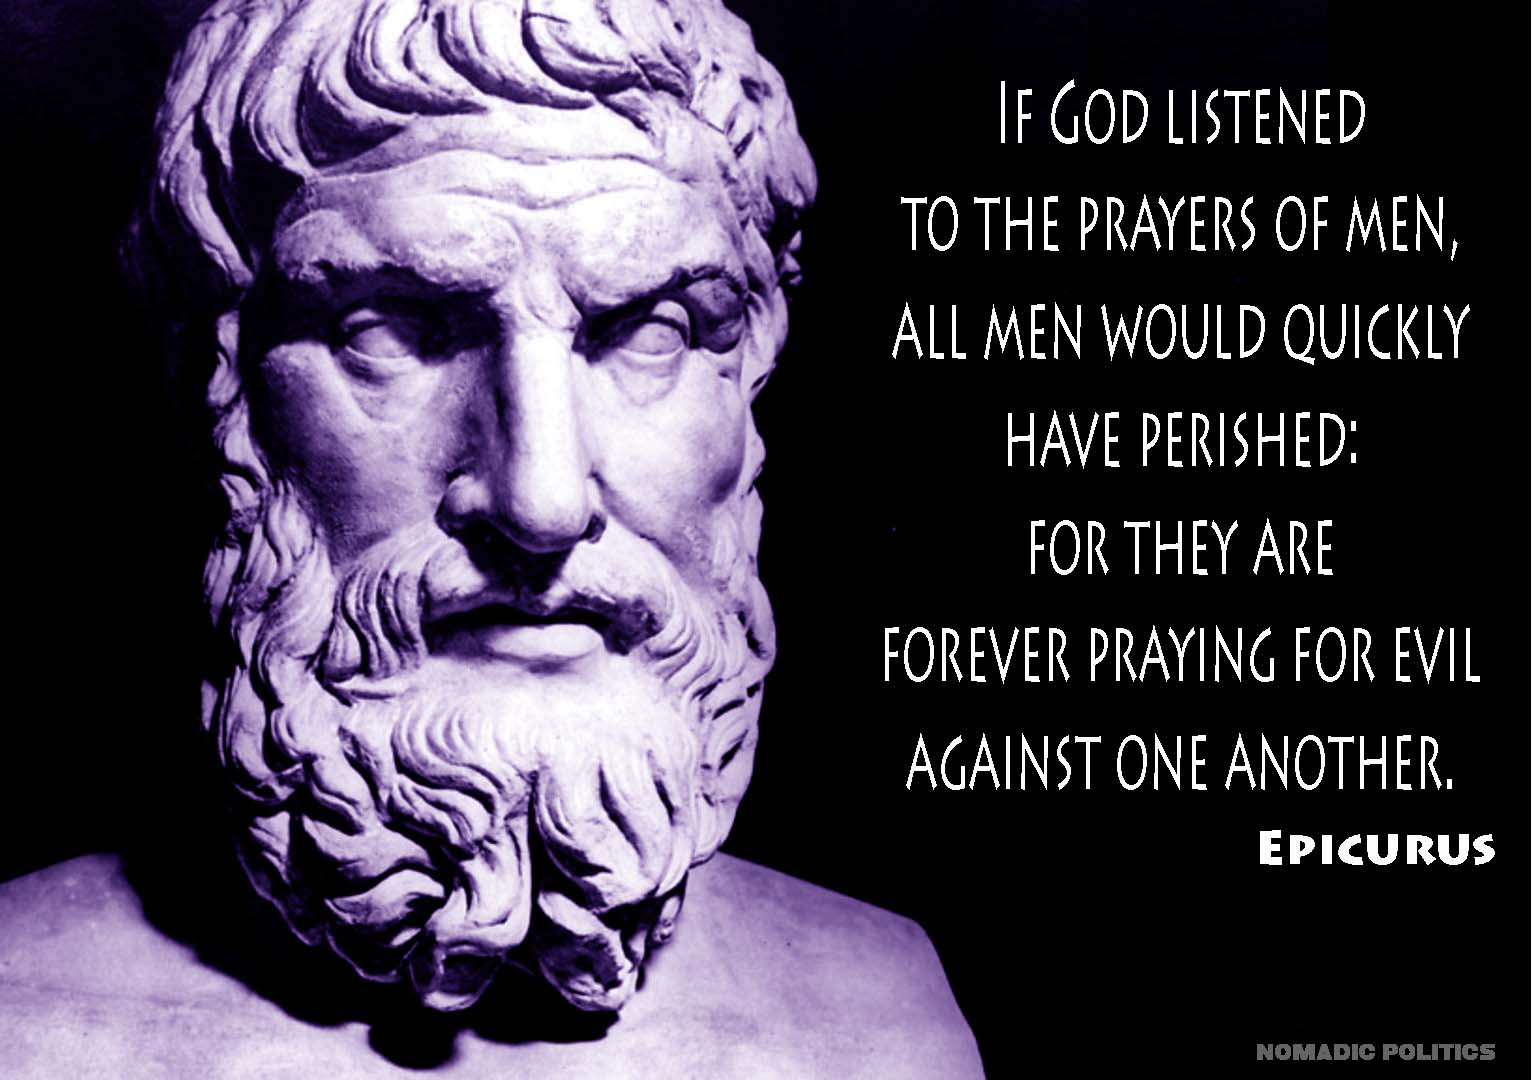 accepting death  - philosophy epicurus - If God Listened To The Prayers Of Men, All Men Would Quickly Have Perished For They Are Forever Praying For Evil Against One Another. Epicurus Nomadic Politics